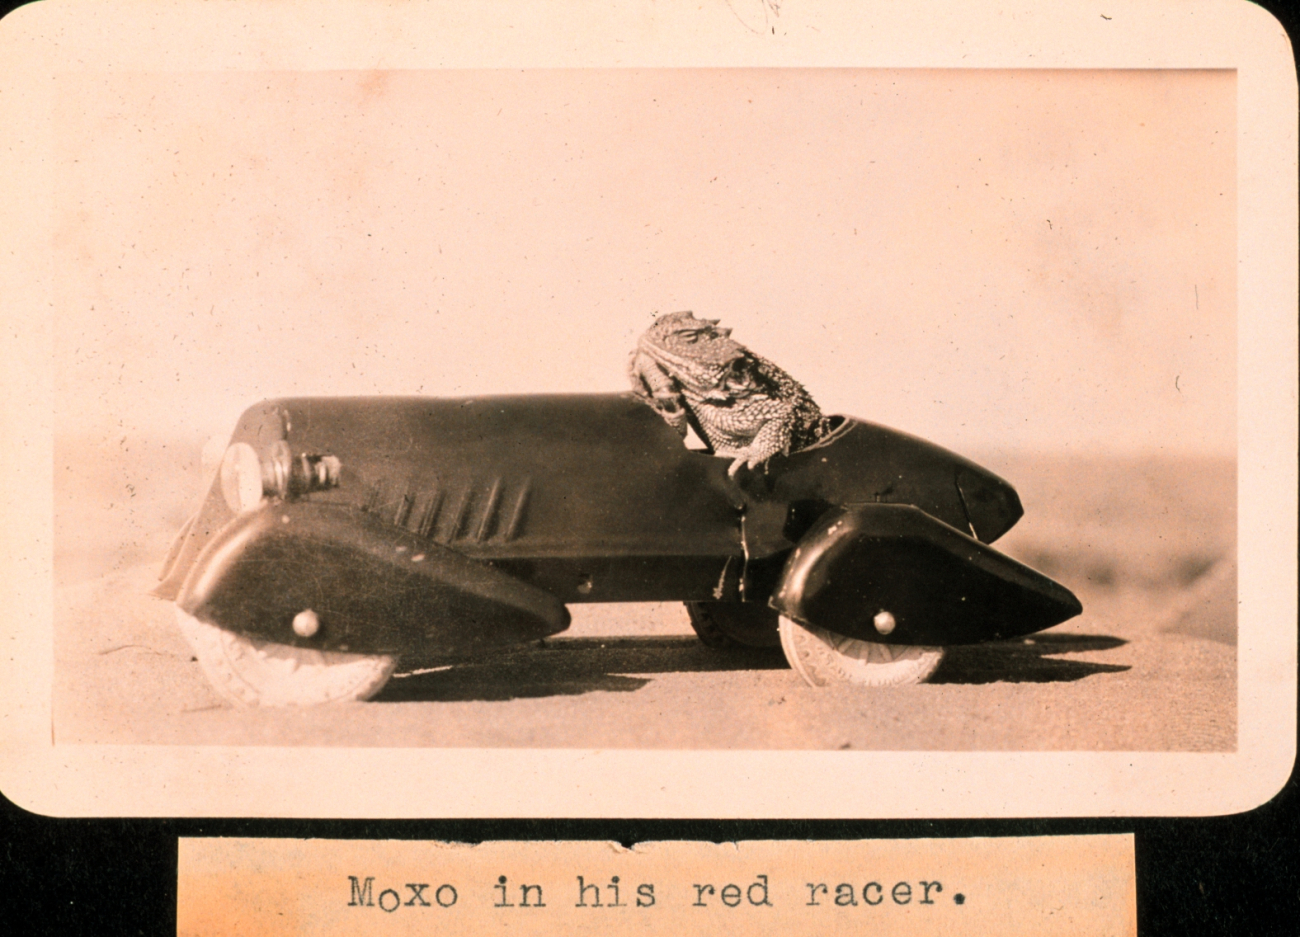 Moxo in his red racer